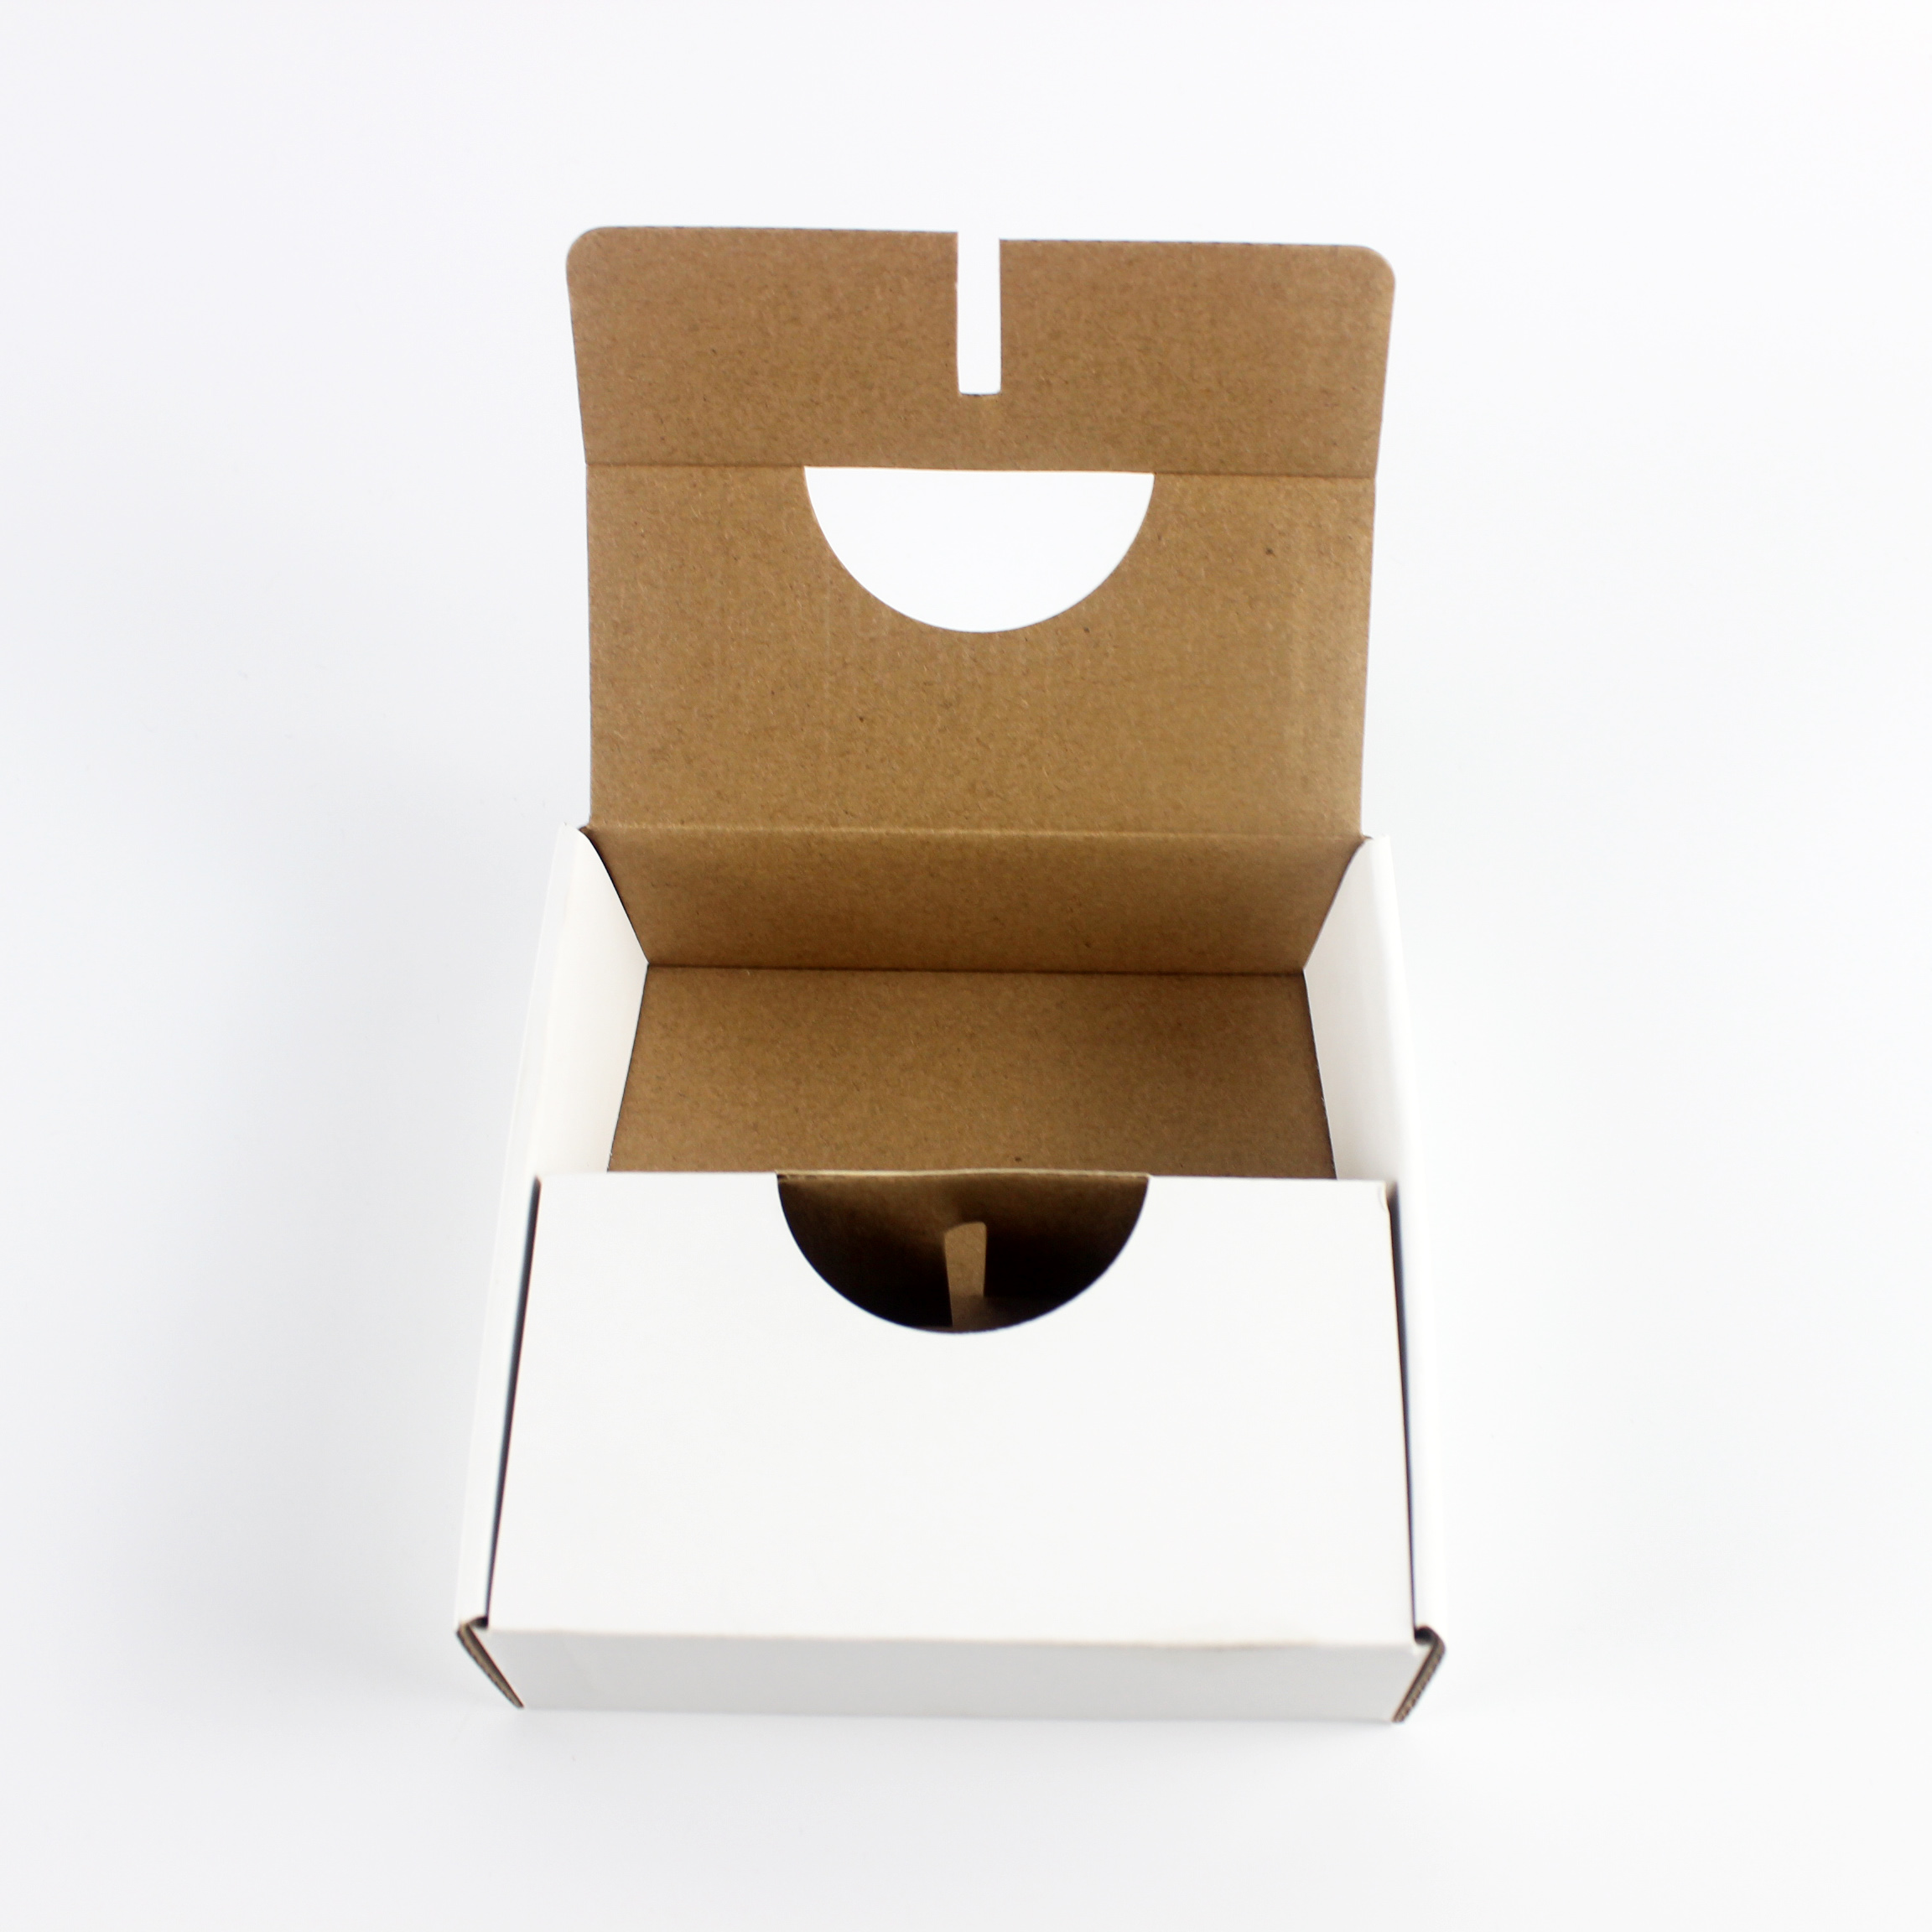 High Quality Kraft Paper White Foldable Box Packaging For Various Gift Giving Occasions